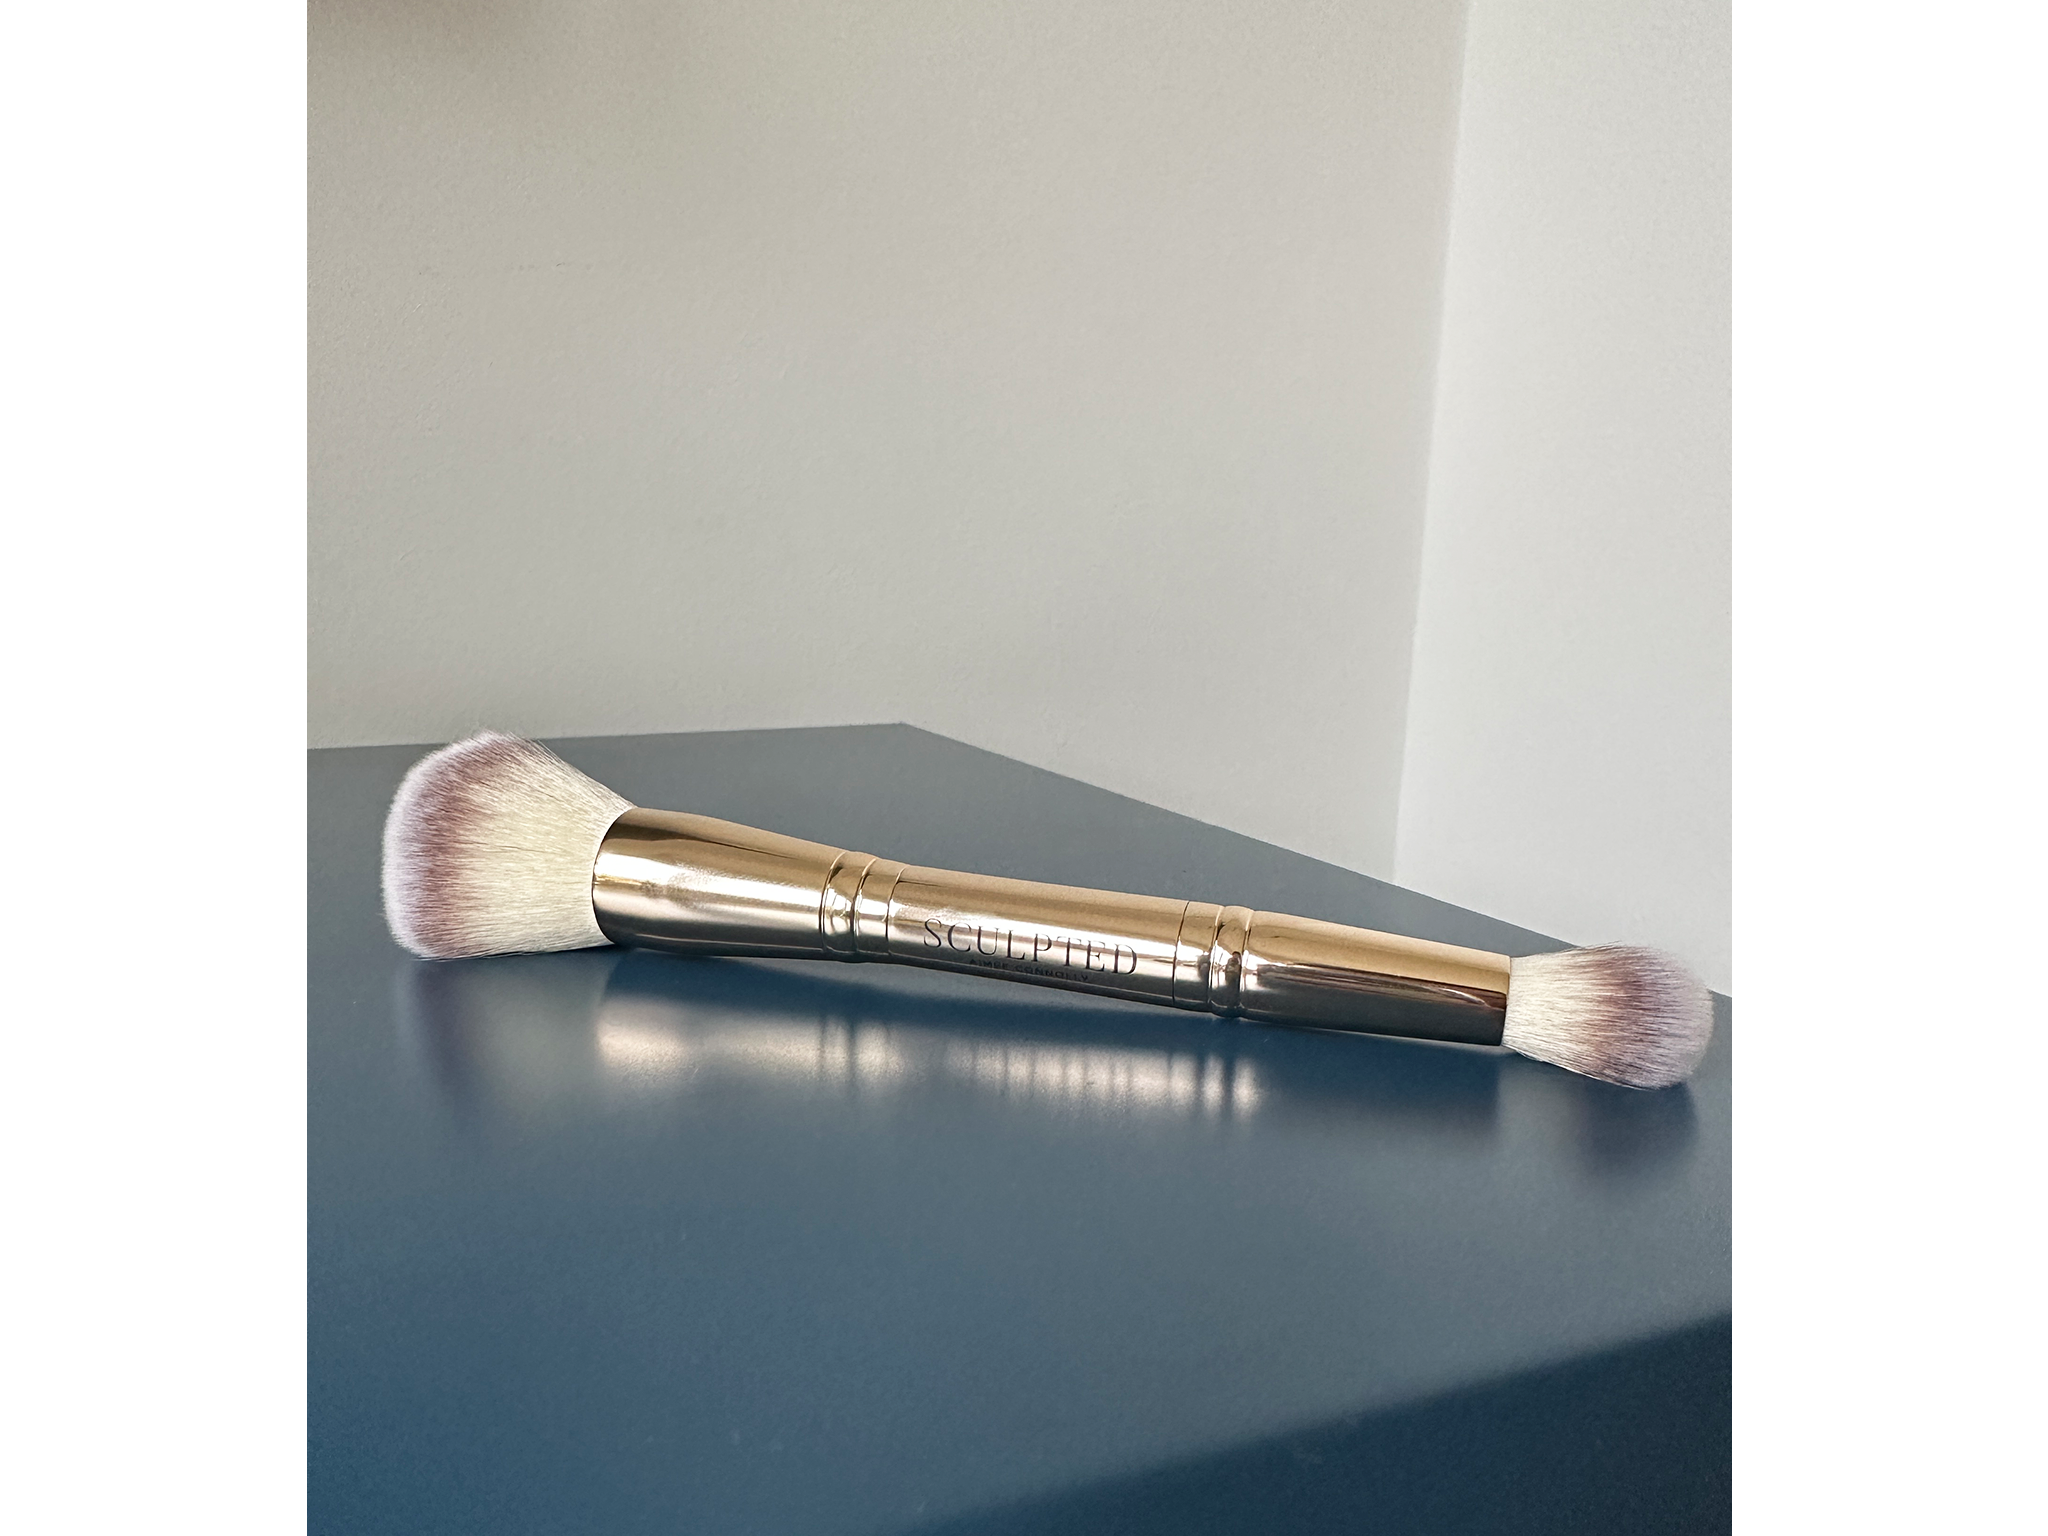 Sculpted by Aimee complexion brush